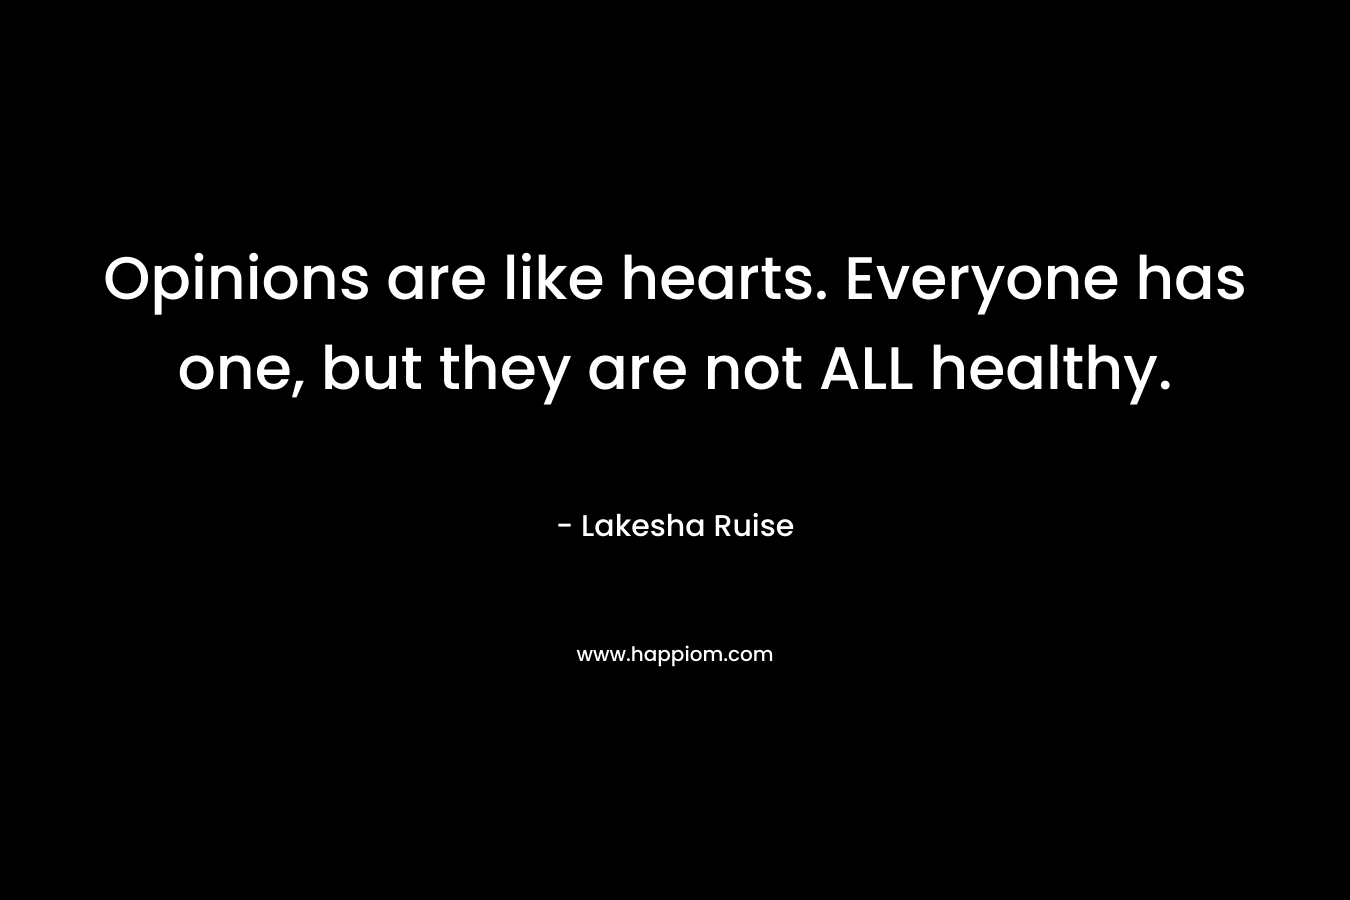 Opinions are like hearts. Everyone has one, but they are not ALL healthy.